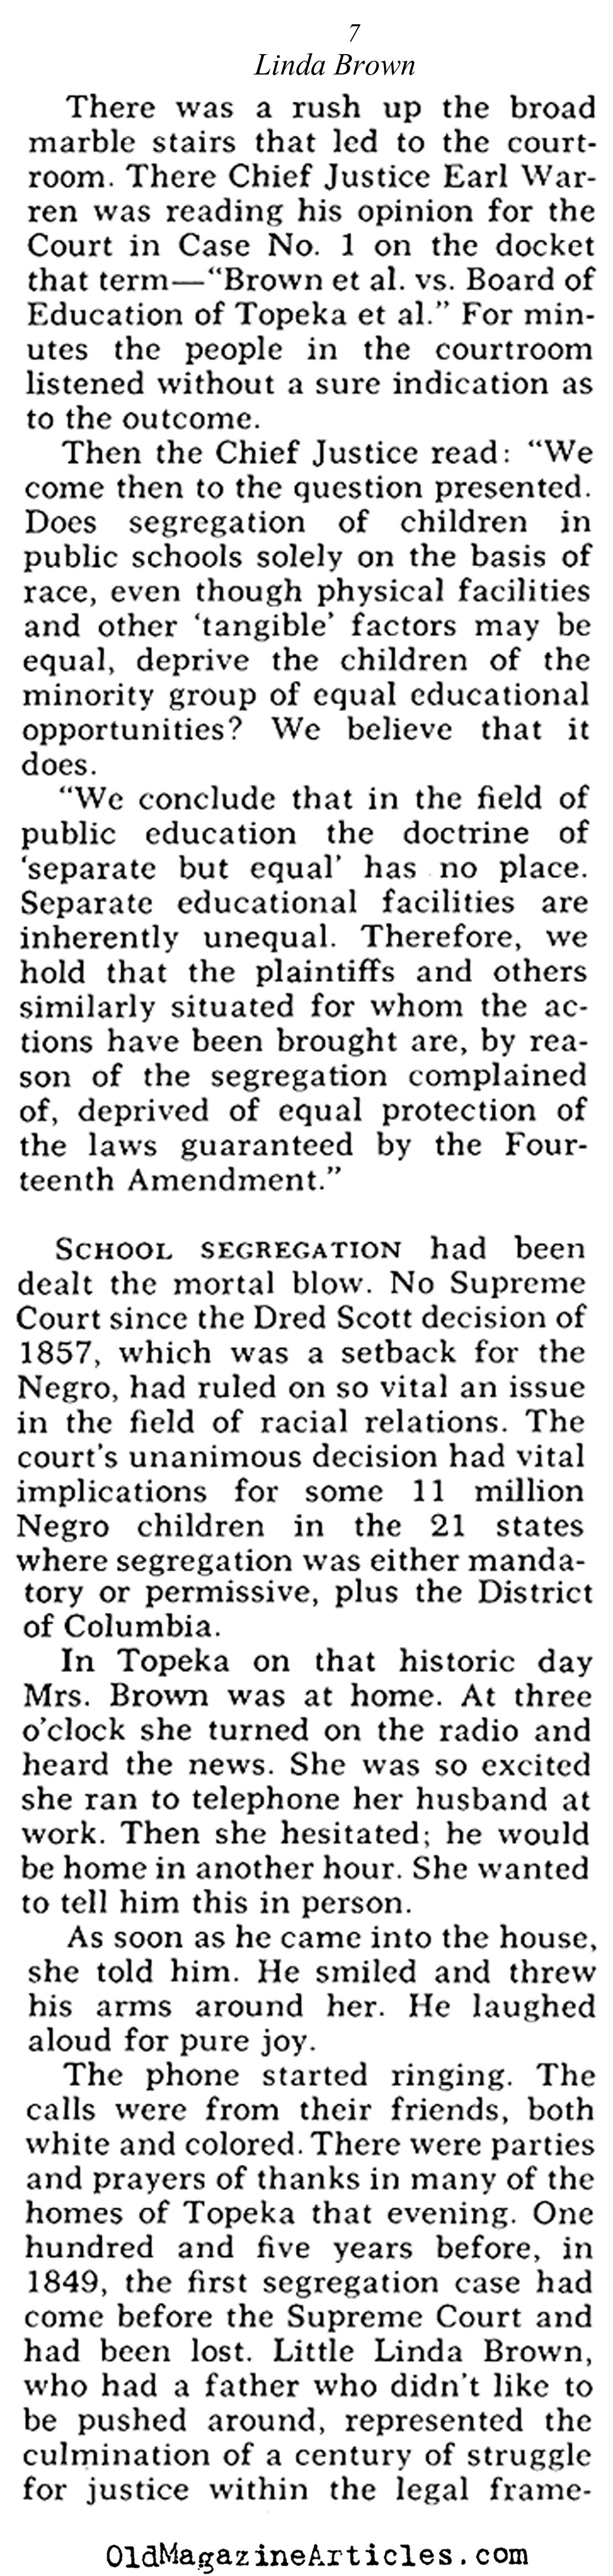 ''The Girl Who Started the Civil-Rights Breakthrough'' (Pageant Magazine, 1964)